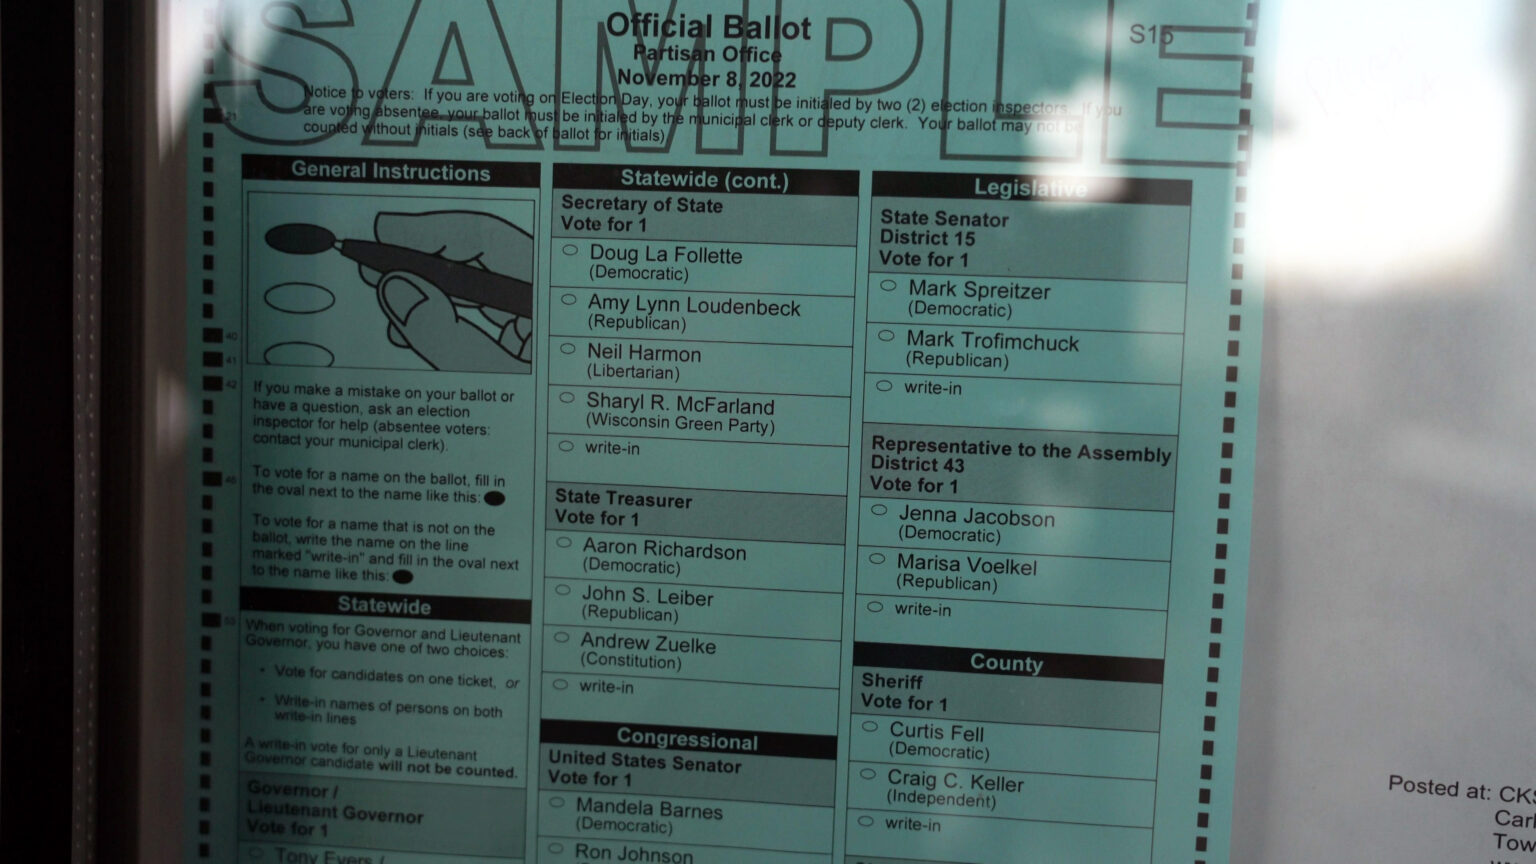 An official ballot for the November 8, 2022 election with a large stenciled-stamp reading SAMPLE across its top is visible in a glass display case.